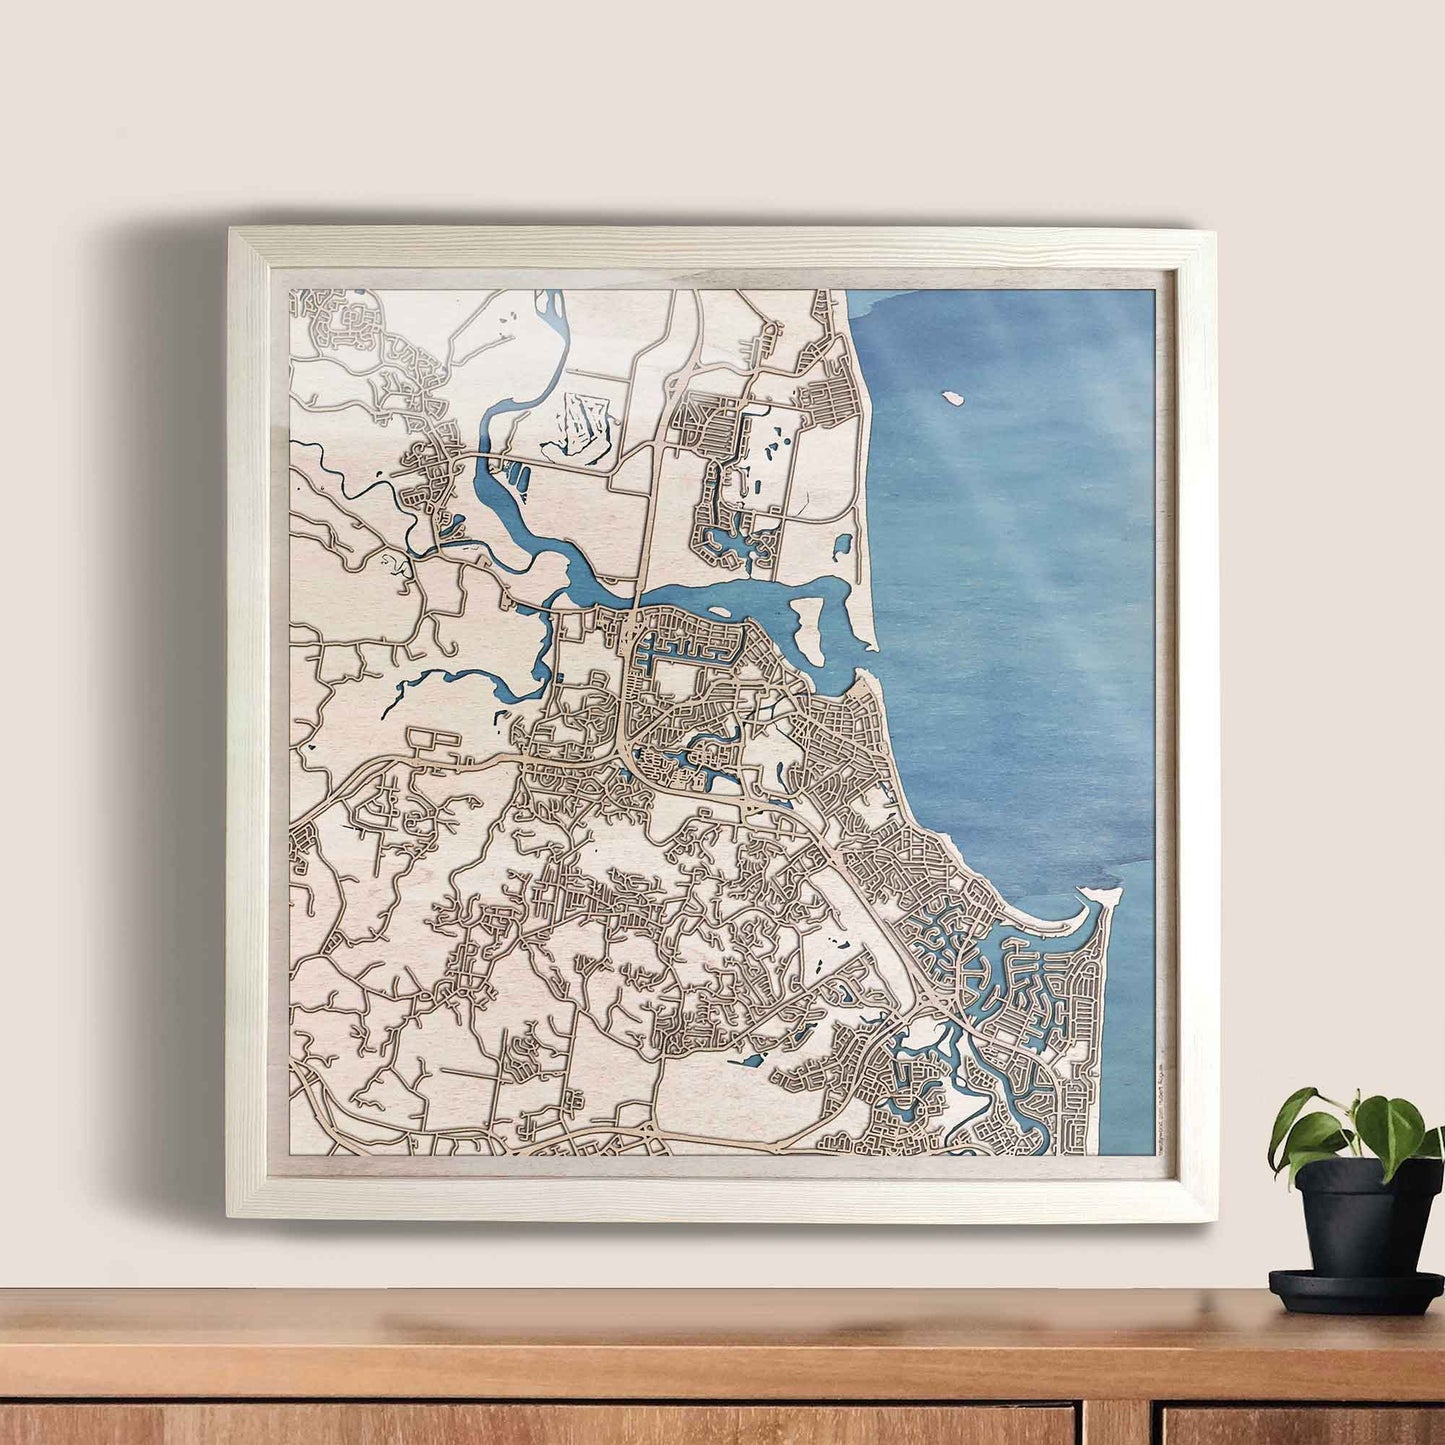 Sunshine Coast Wooden Map by CityWood - Custom Wood Map Art - Unique Laser Cut Engraved - Anniversary Gift